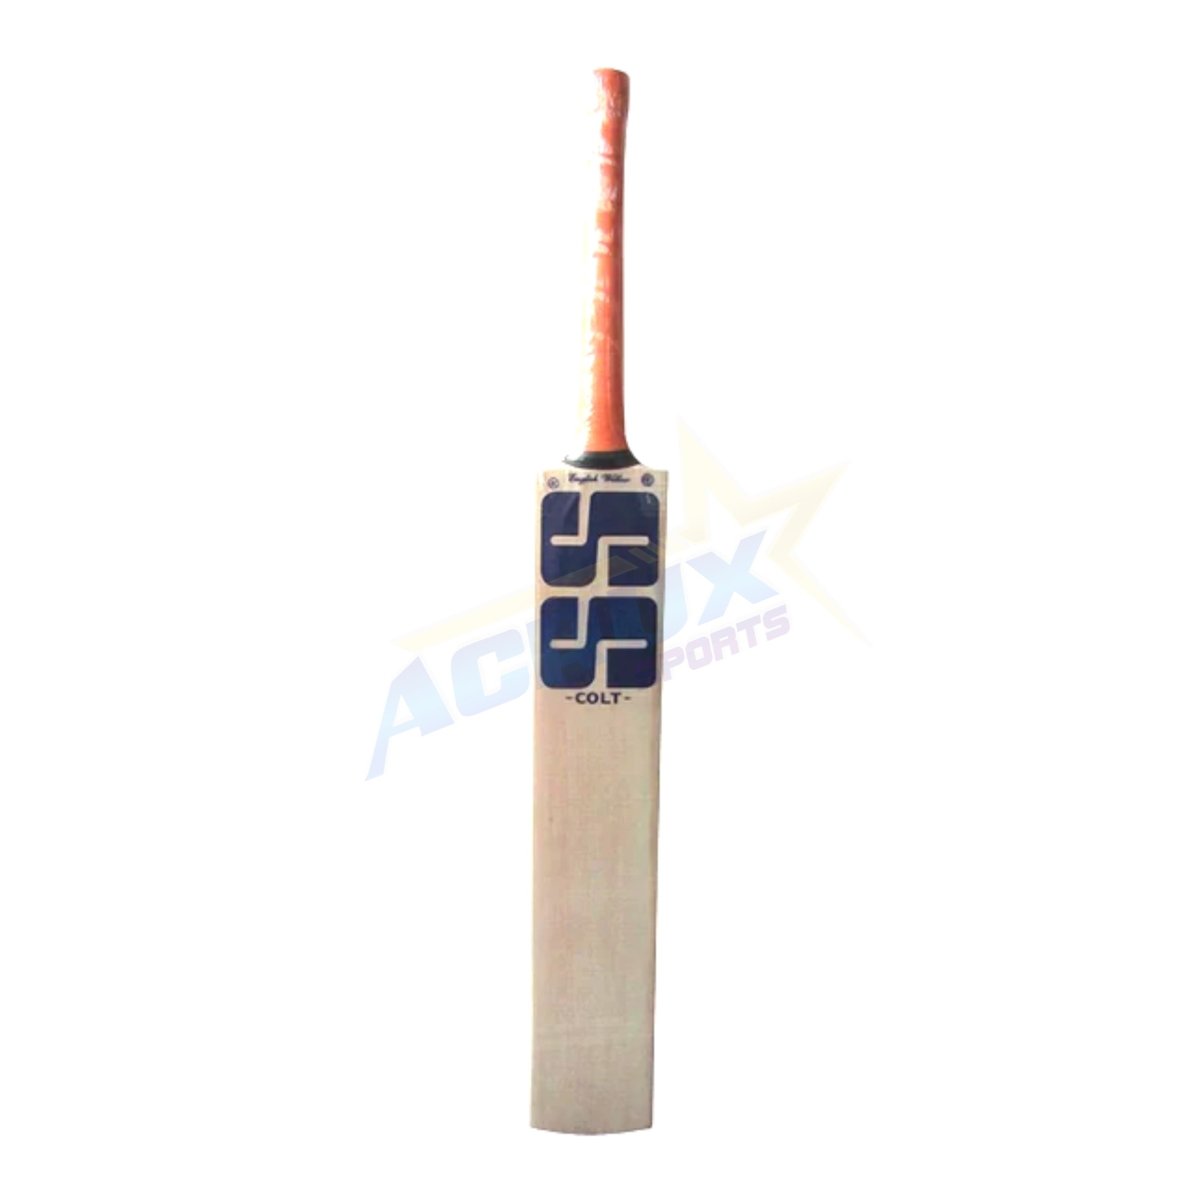 SS Colt Youth English Willow Cricket Bat.